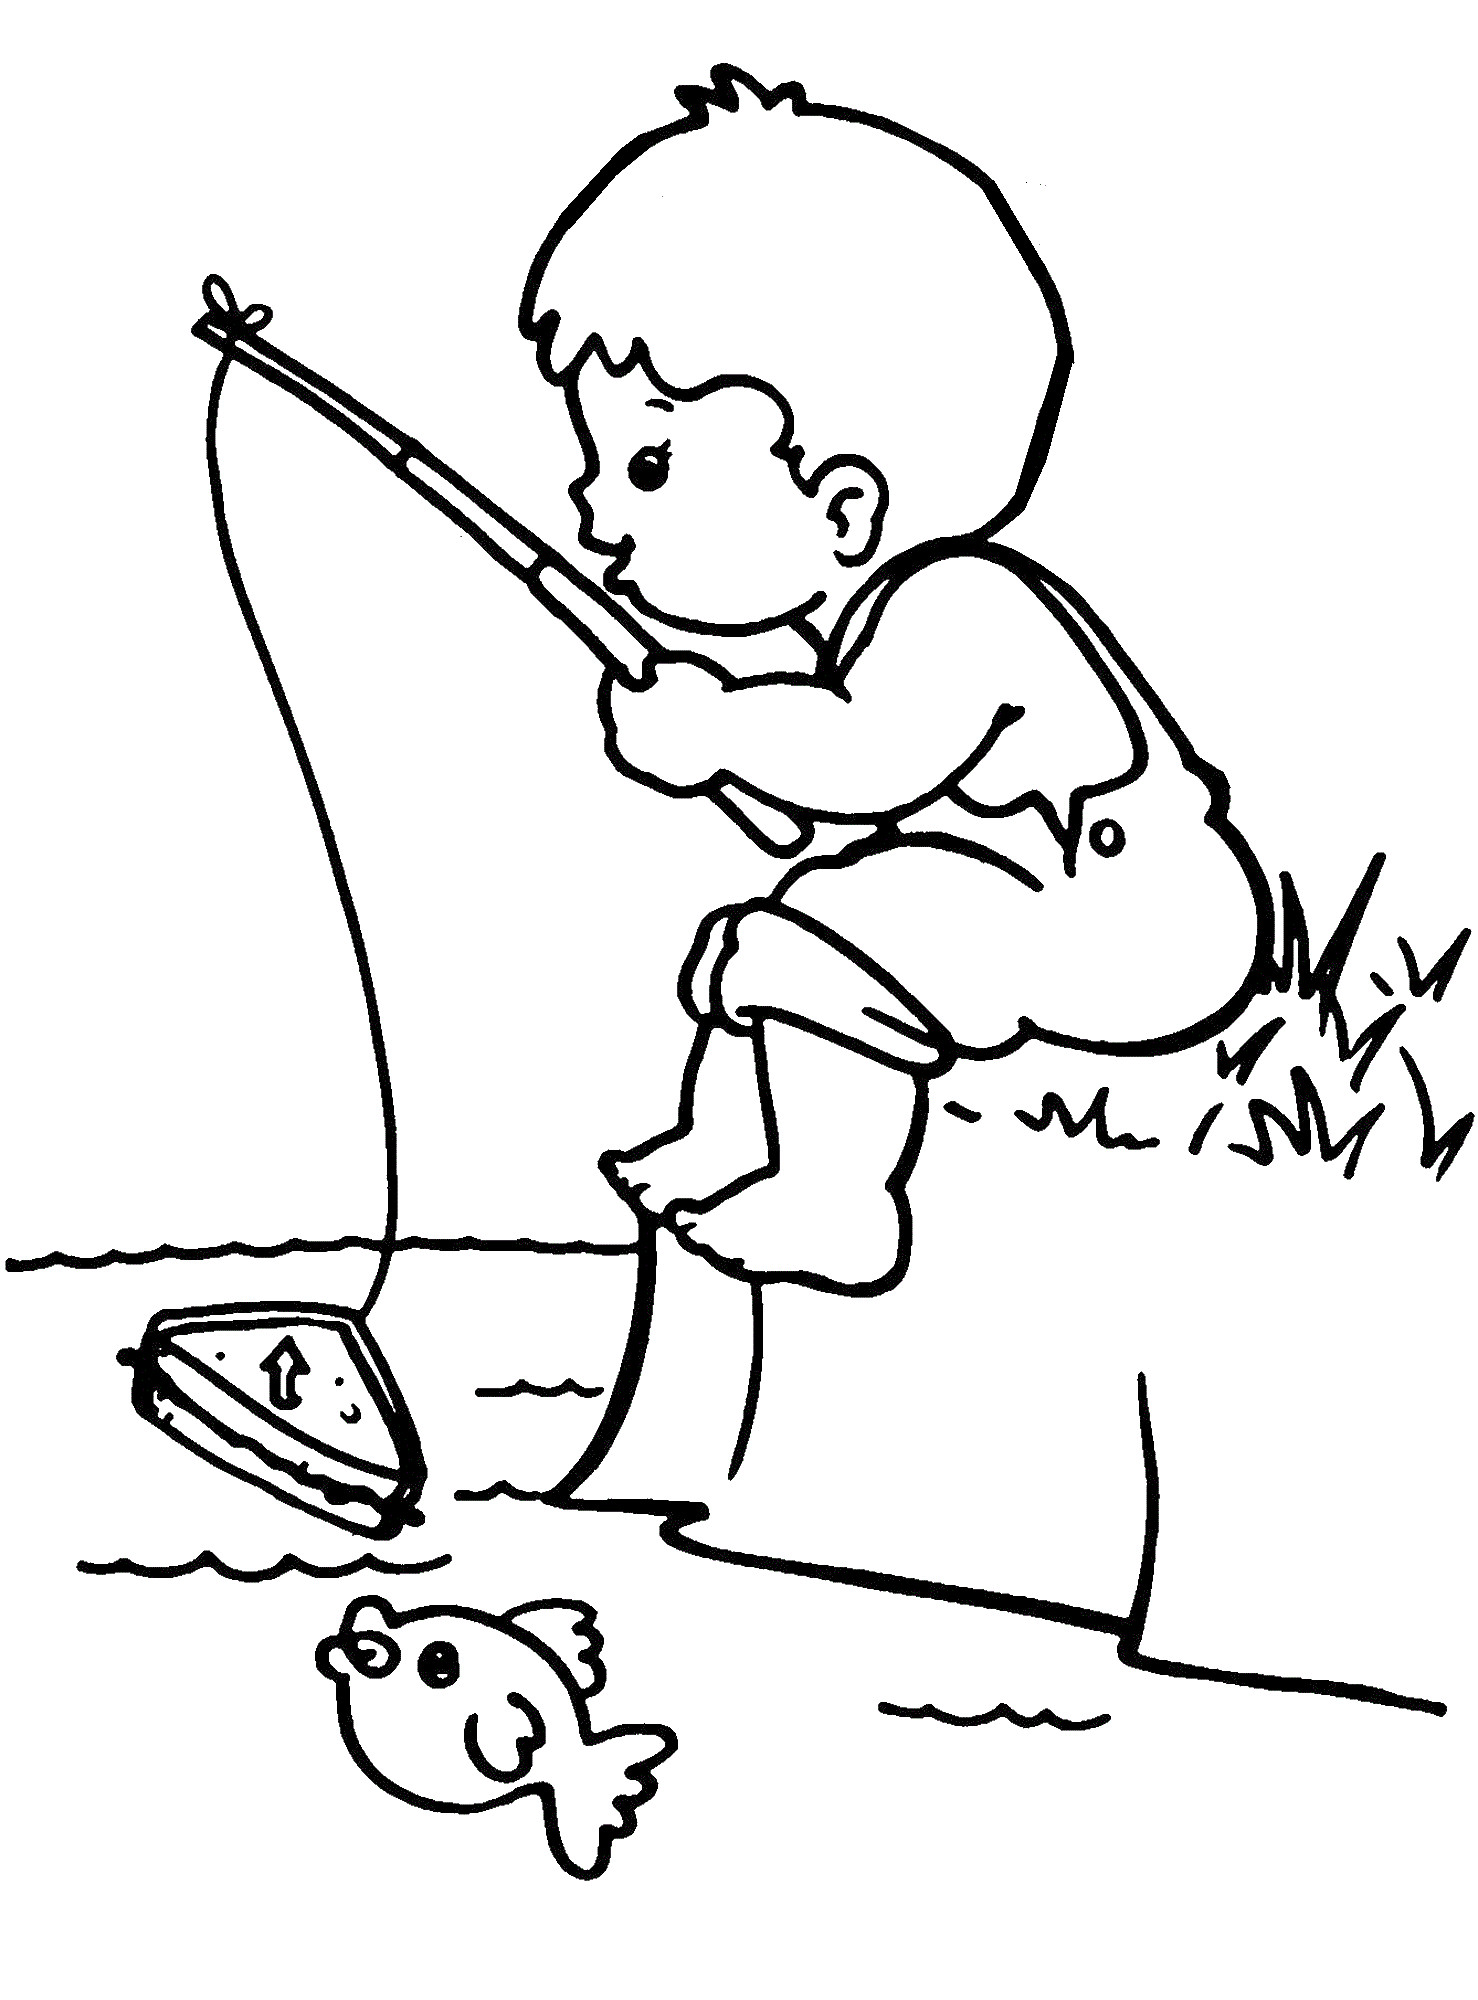 Coloring Sheets For Kids Boys
 Fishing Coloring Pages Best Coloring Pages For Kids